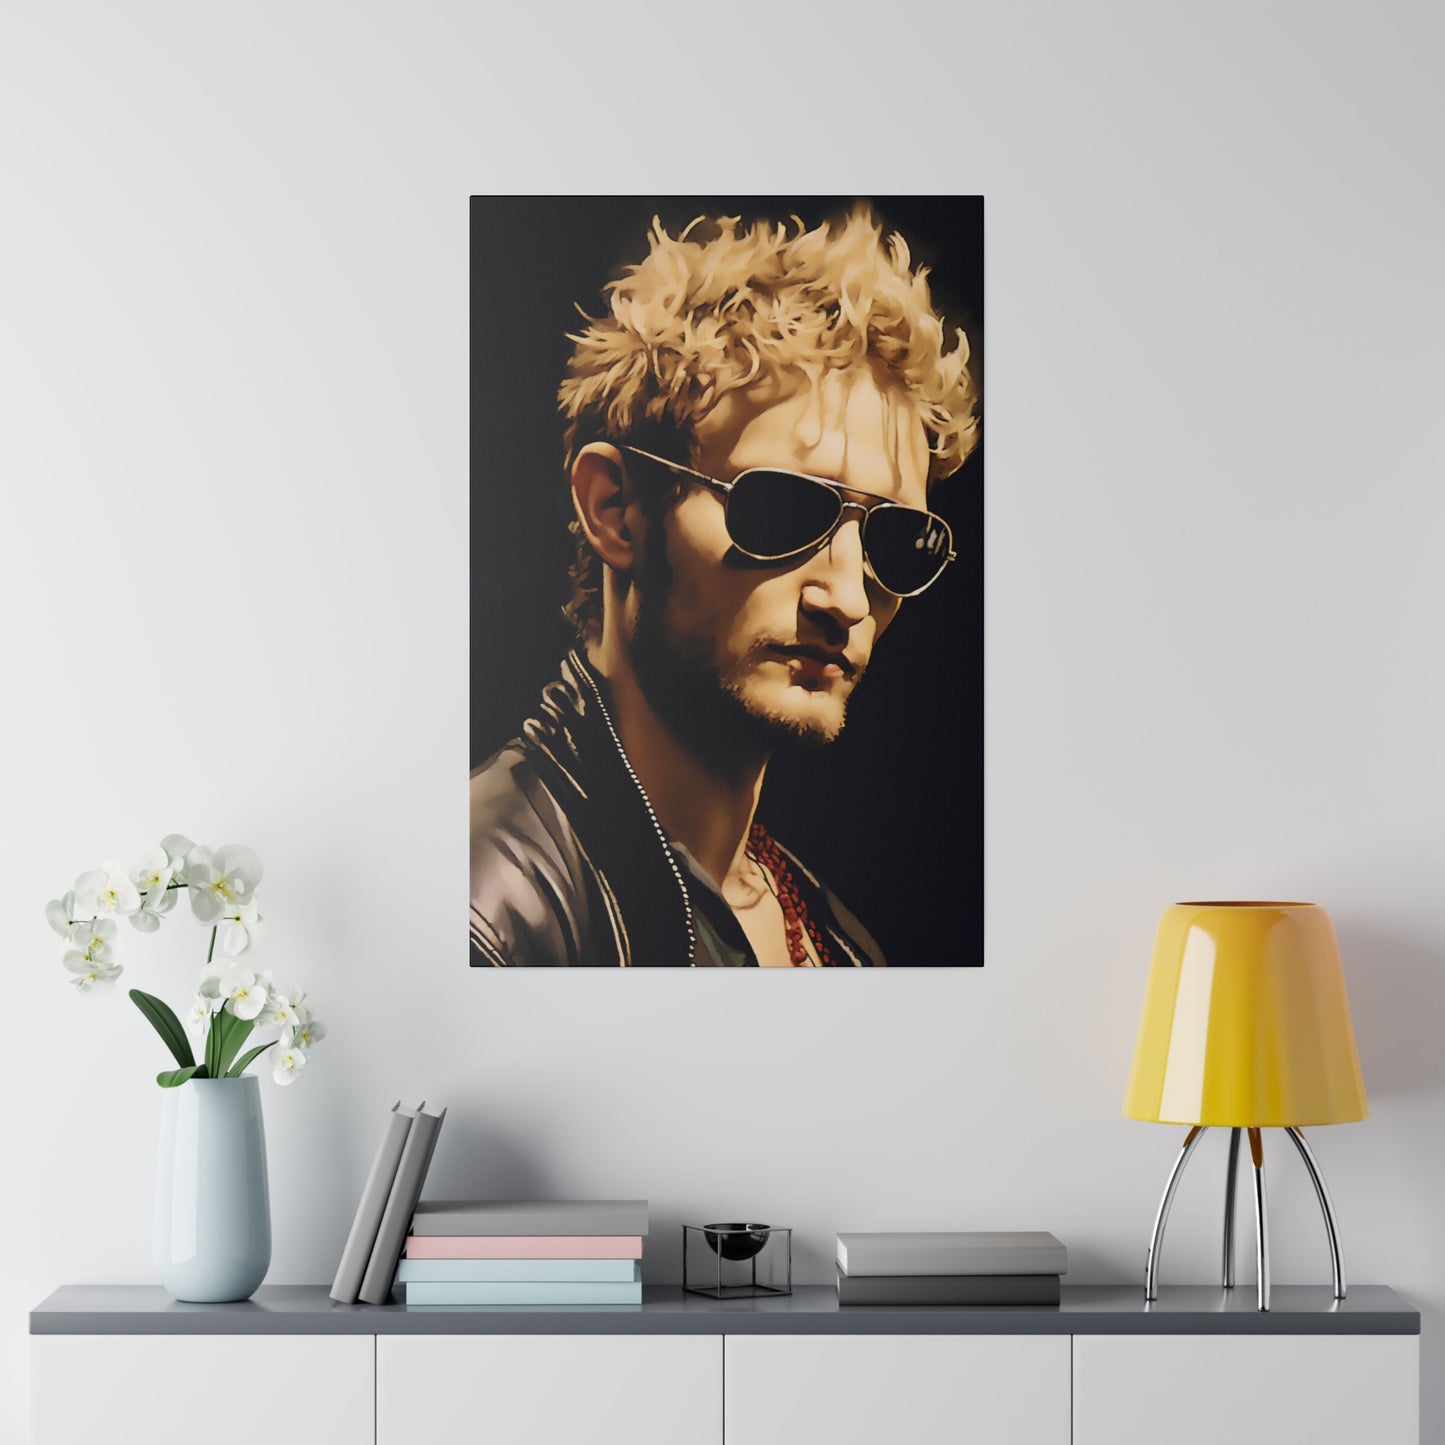 Layne Staley of Alice in Chains Pop Art | Stretched Canvas Print